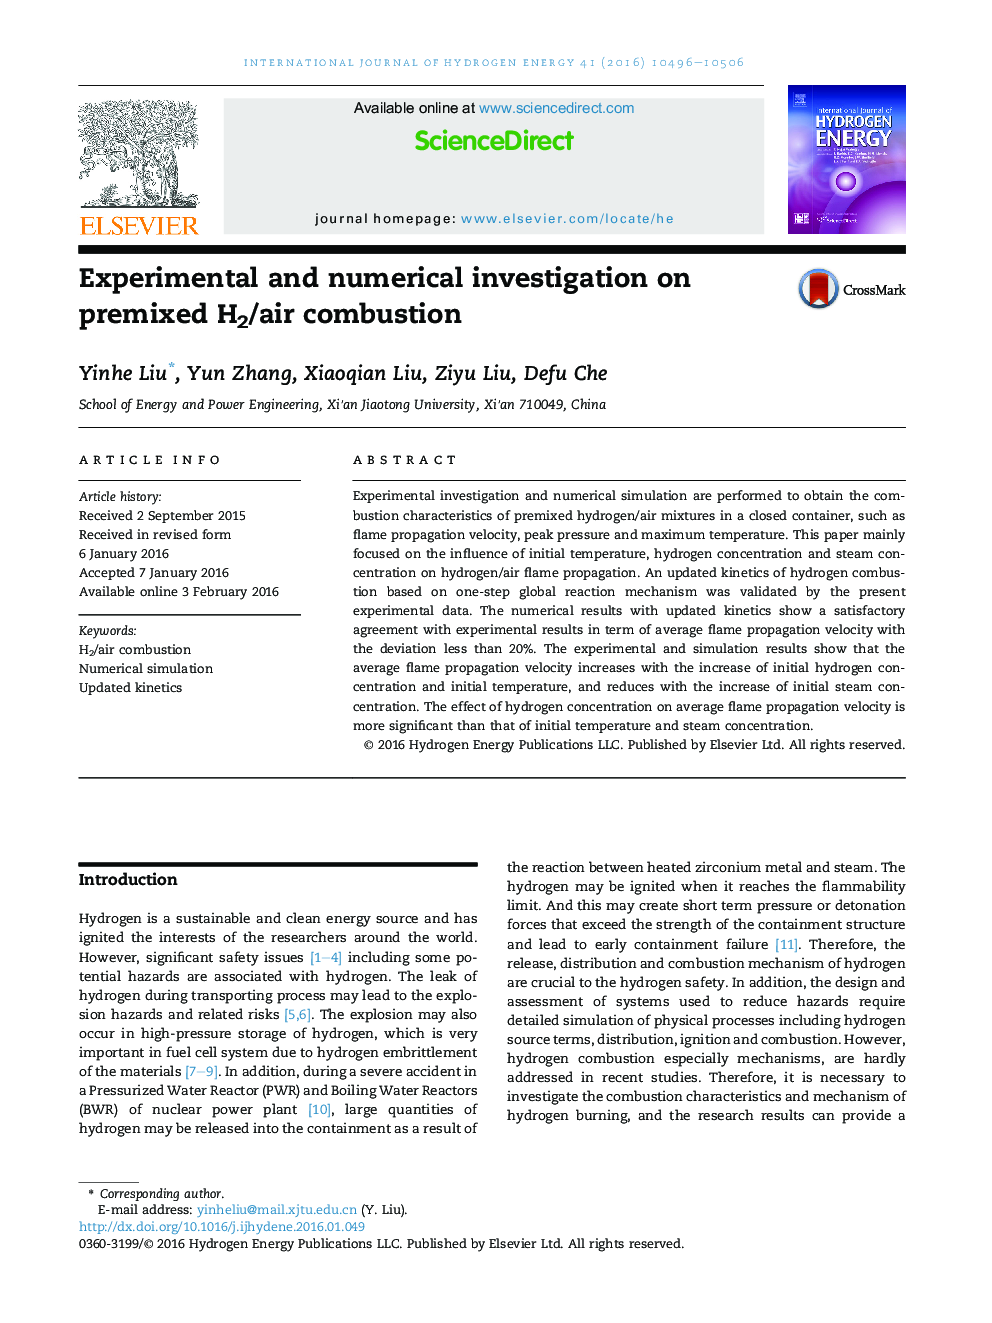 Experimental and numerical investigation on premixed H2/air combustion